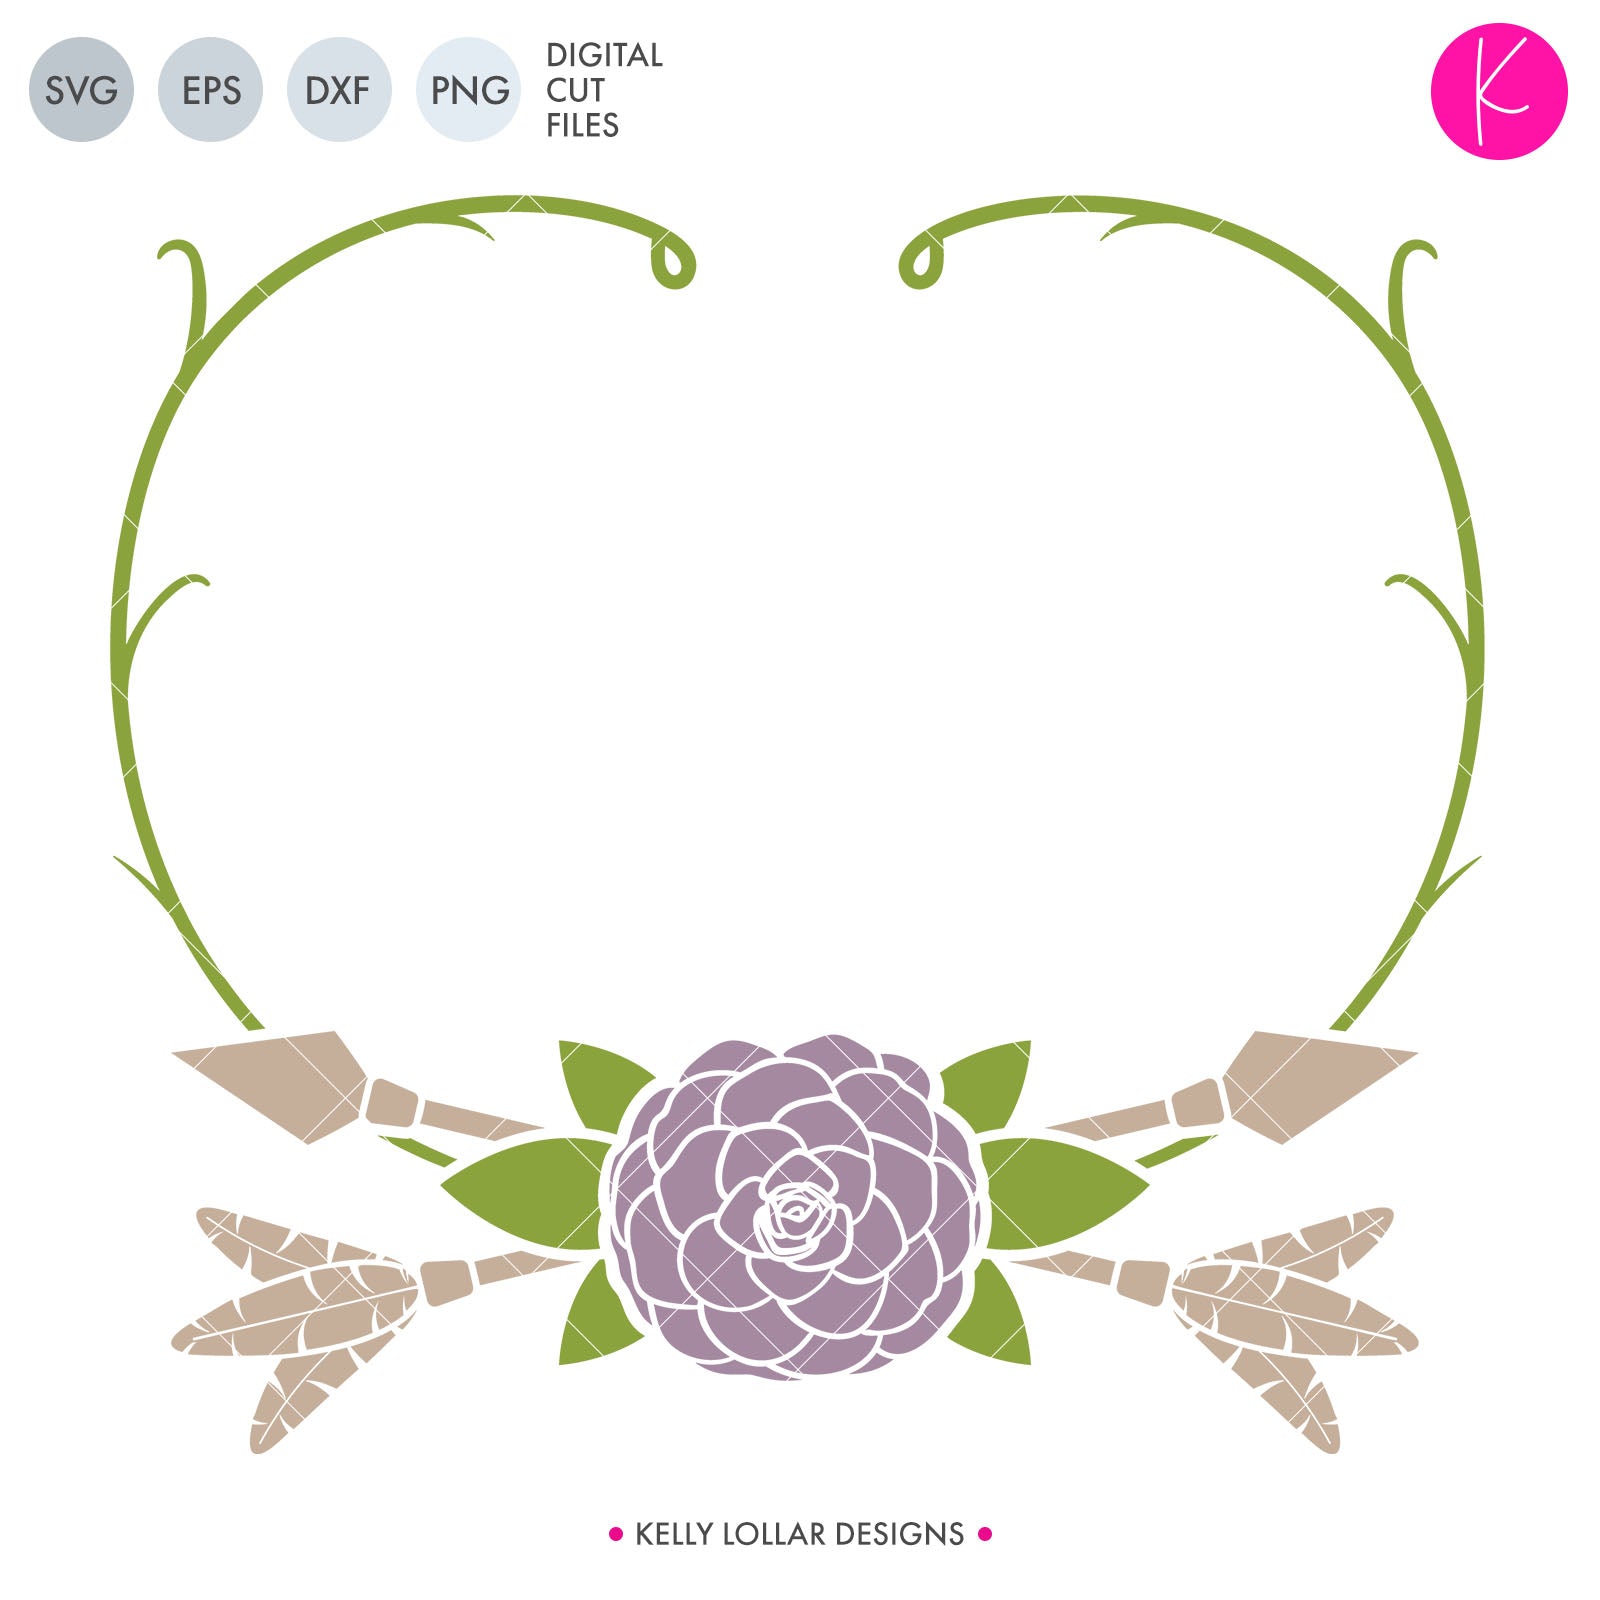 Download Monogram Svg Dxf Eps Png Cut Files Kelly Lollar Designs Tagged Flower